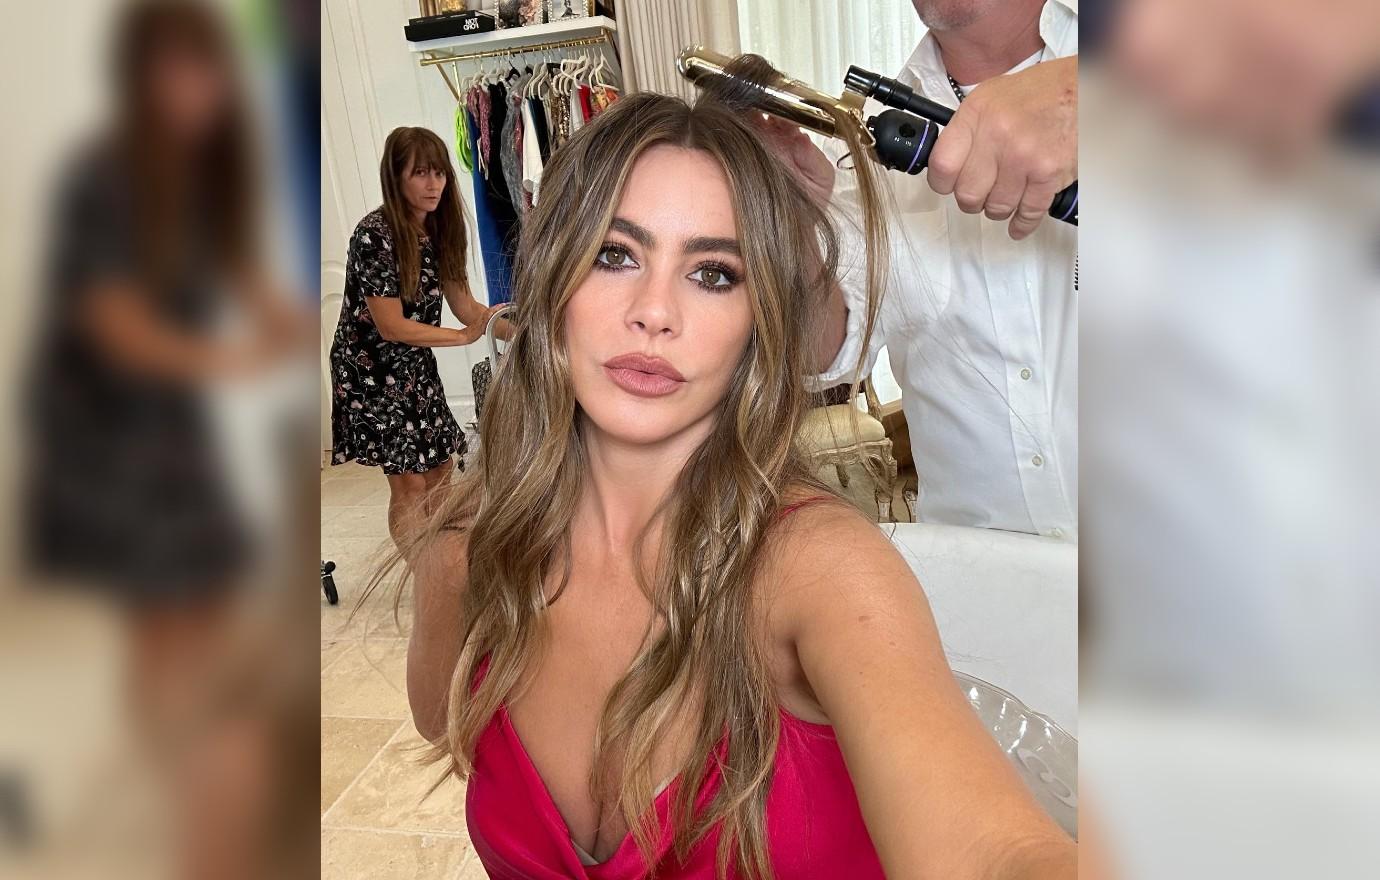 Sofia Vergara Accused Of Photoshopping While Showing Off Her Butt